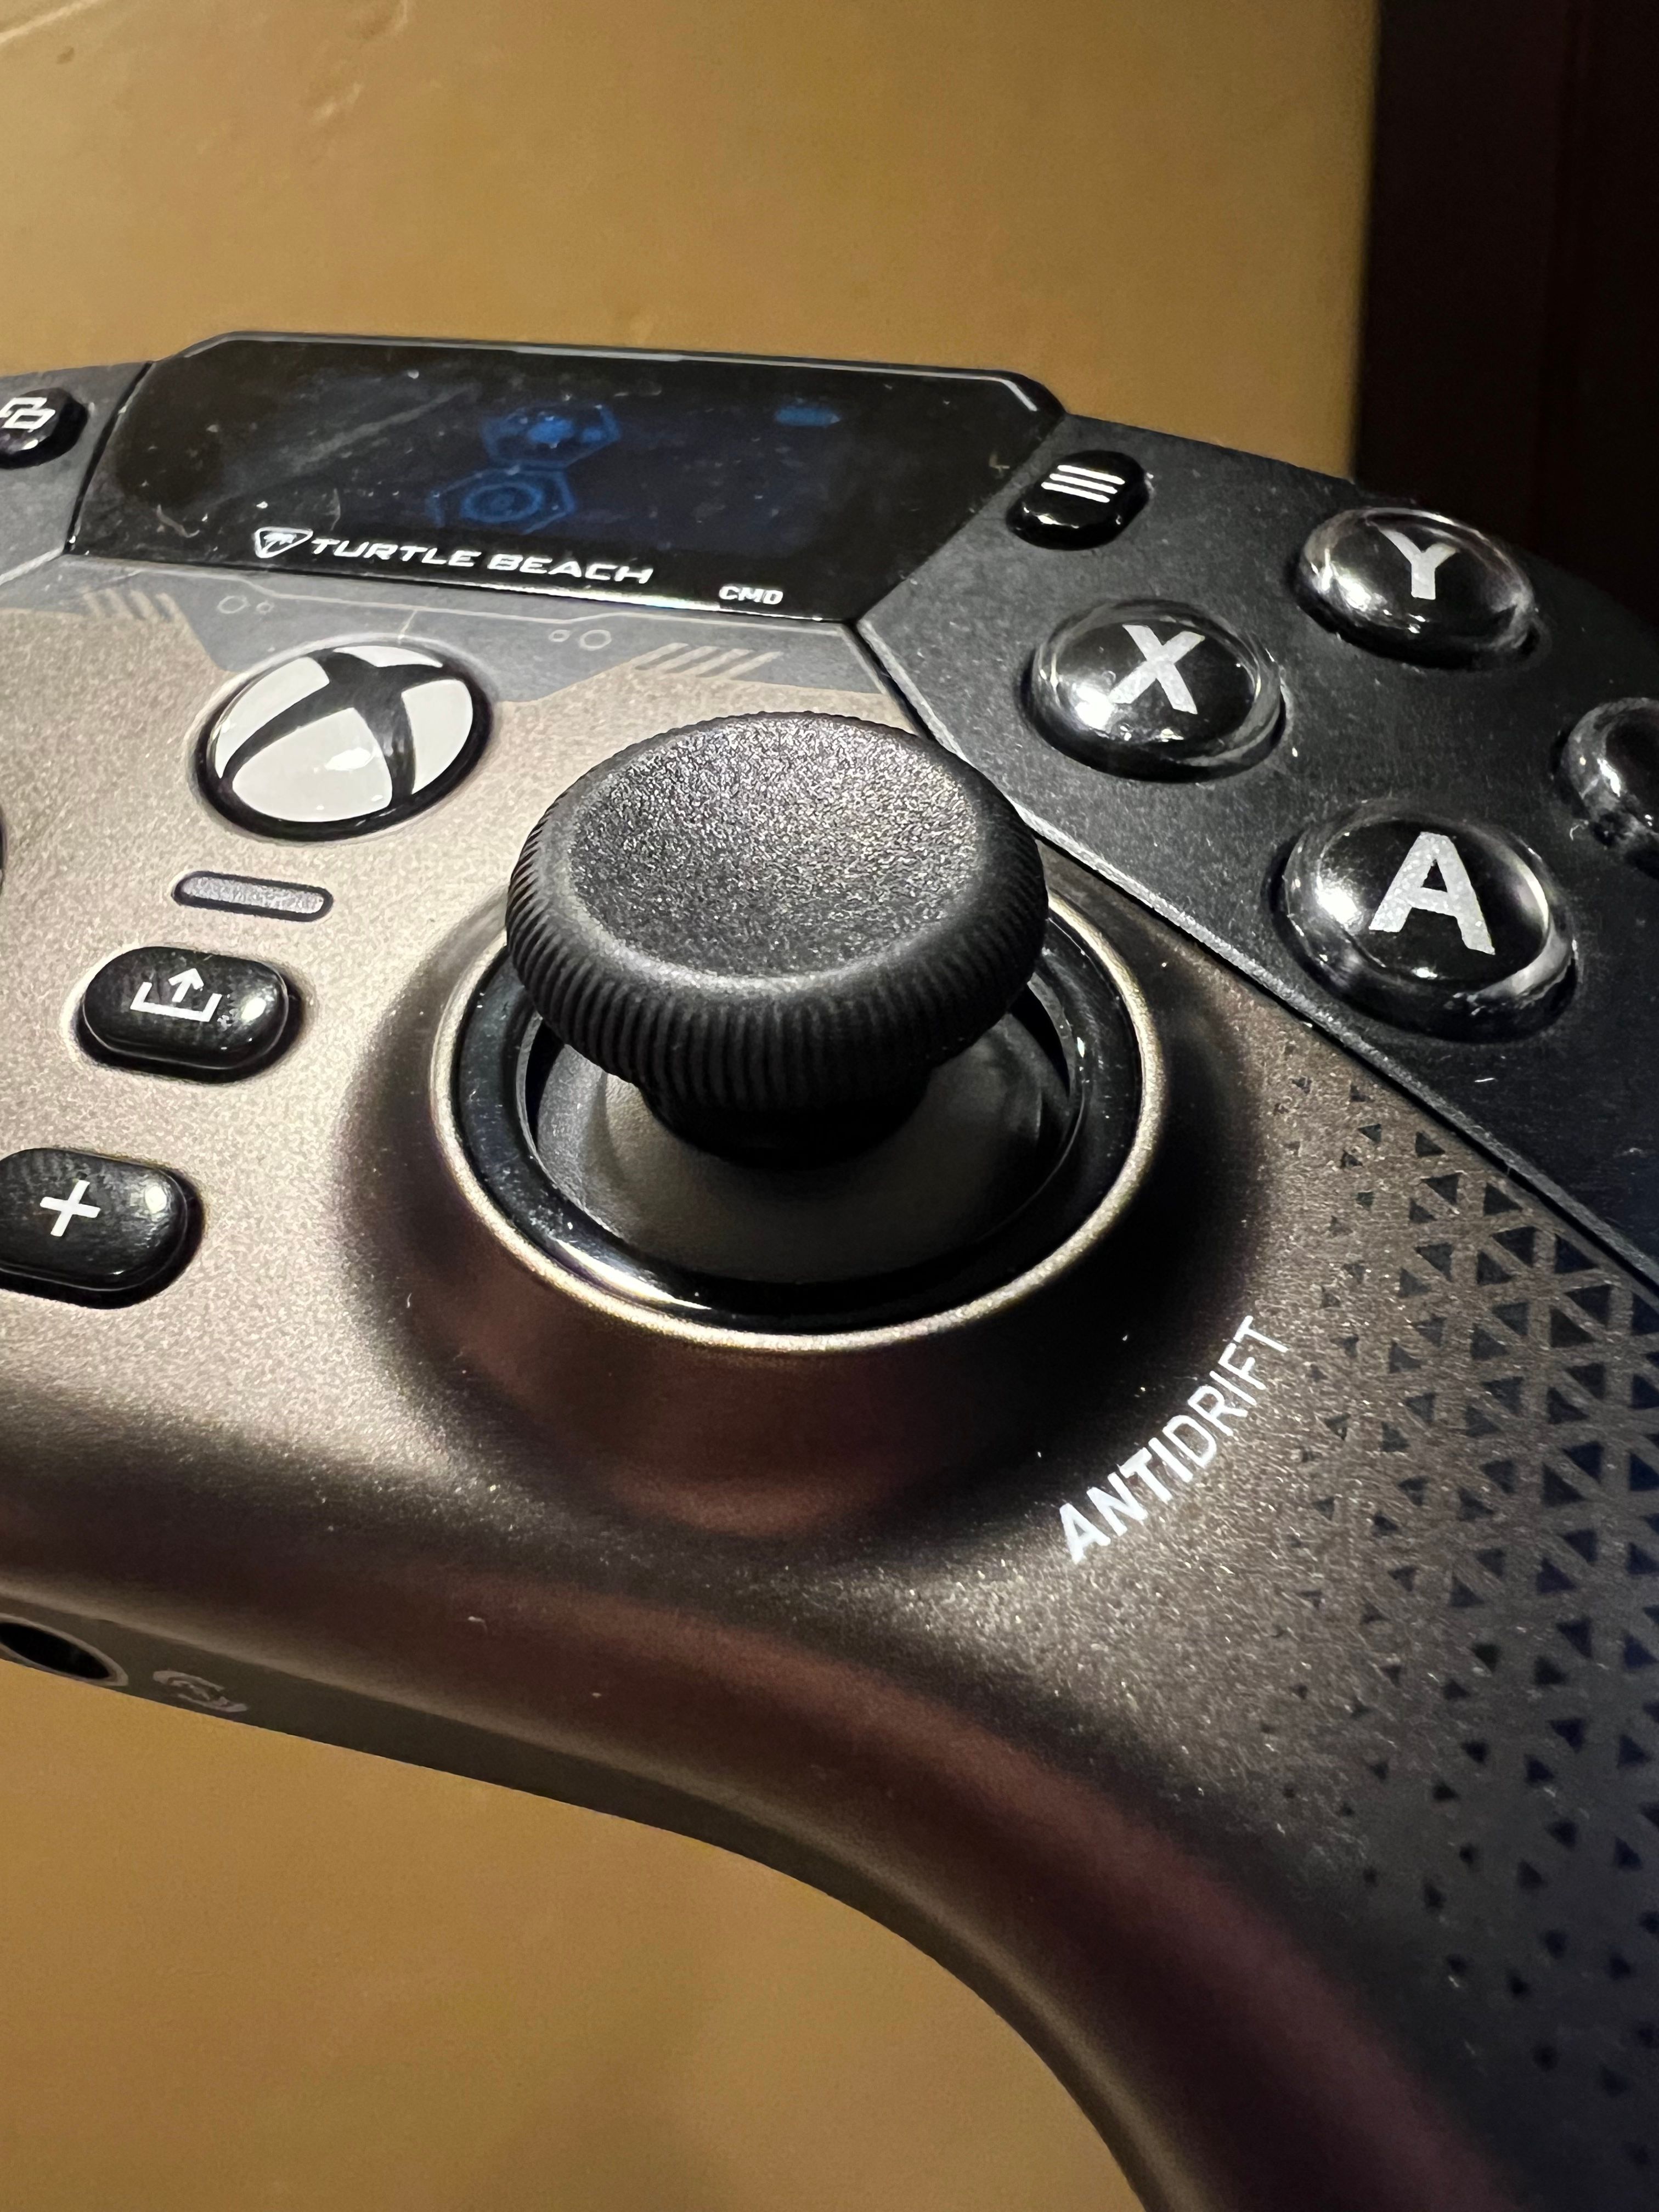 Turtle Beach Stealth Ultra Controller Review